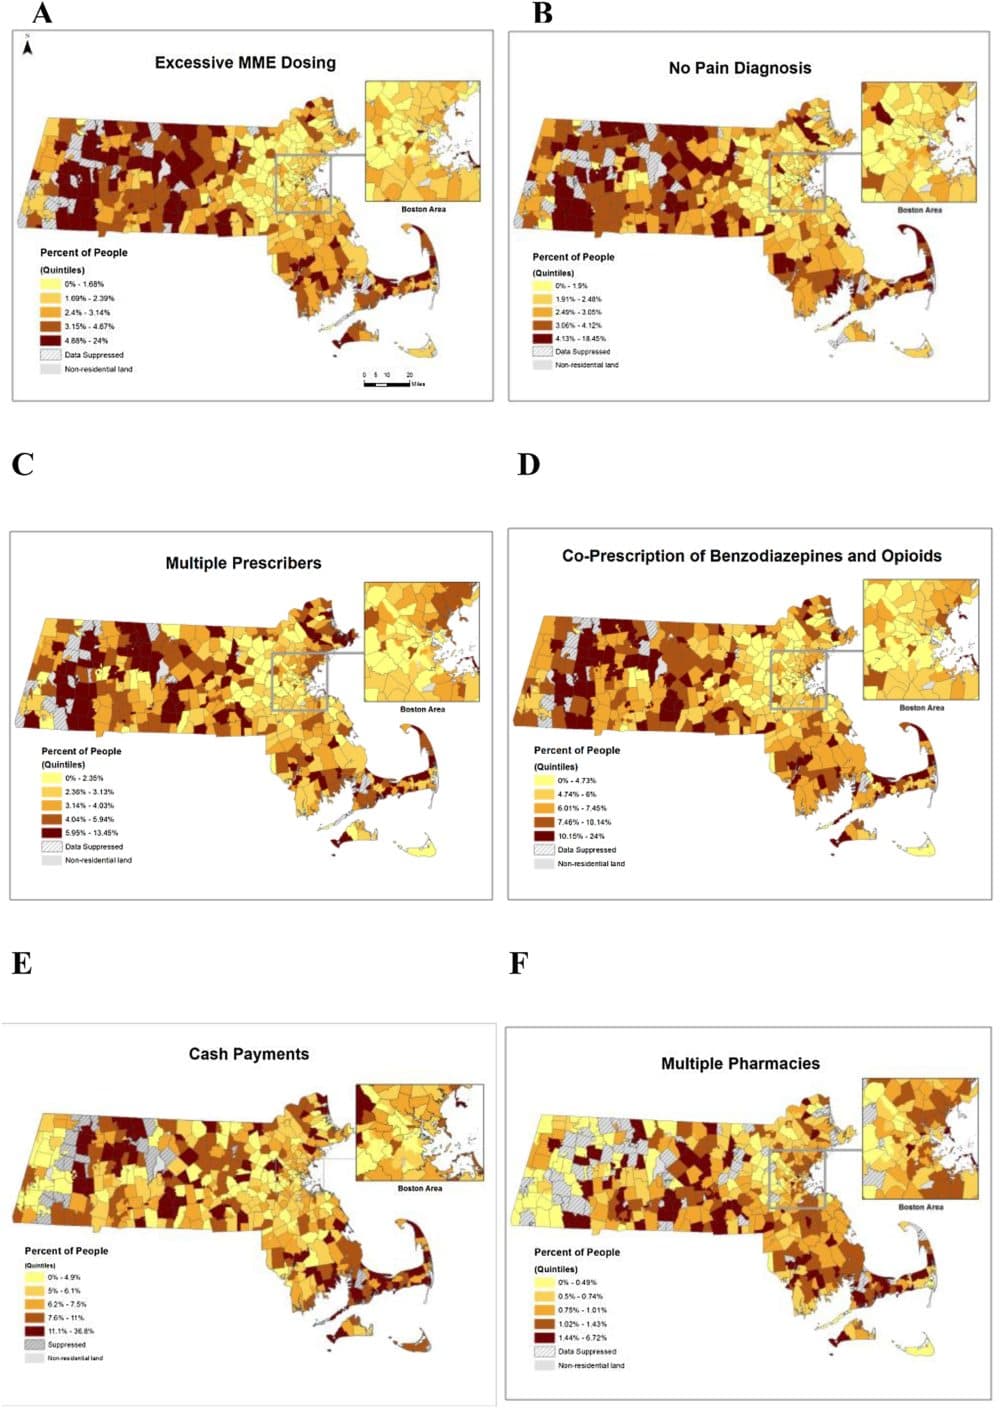 Potentially inappropriate opioid prescription practices (PIP) in Massachusetts from 2011 to 2015. (Courtesy the International Journal of Drug Policy)